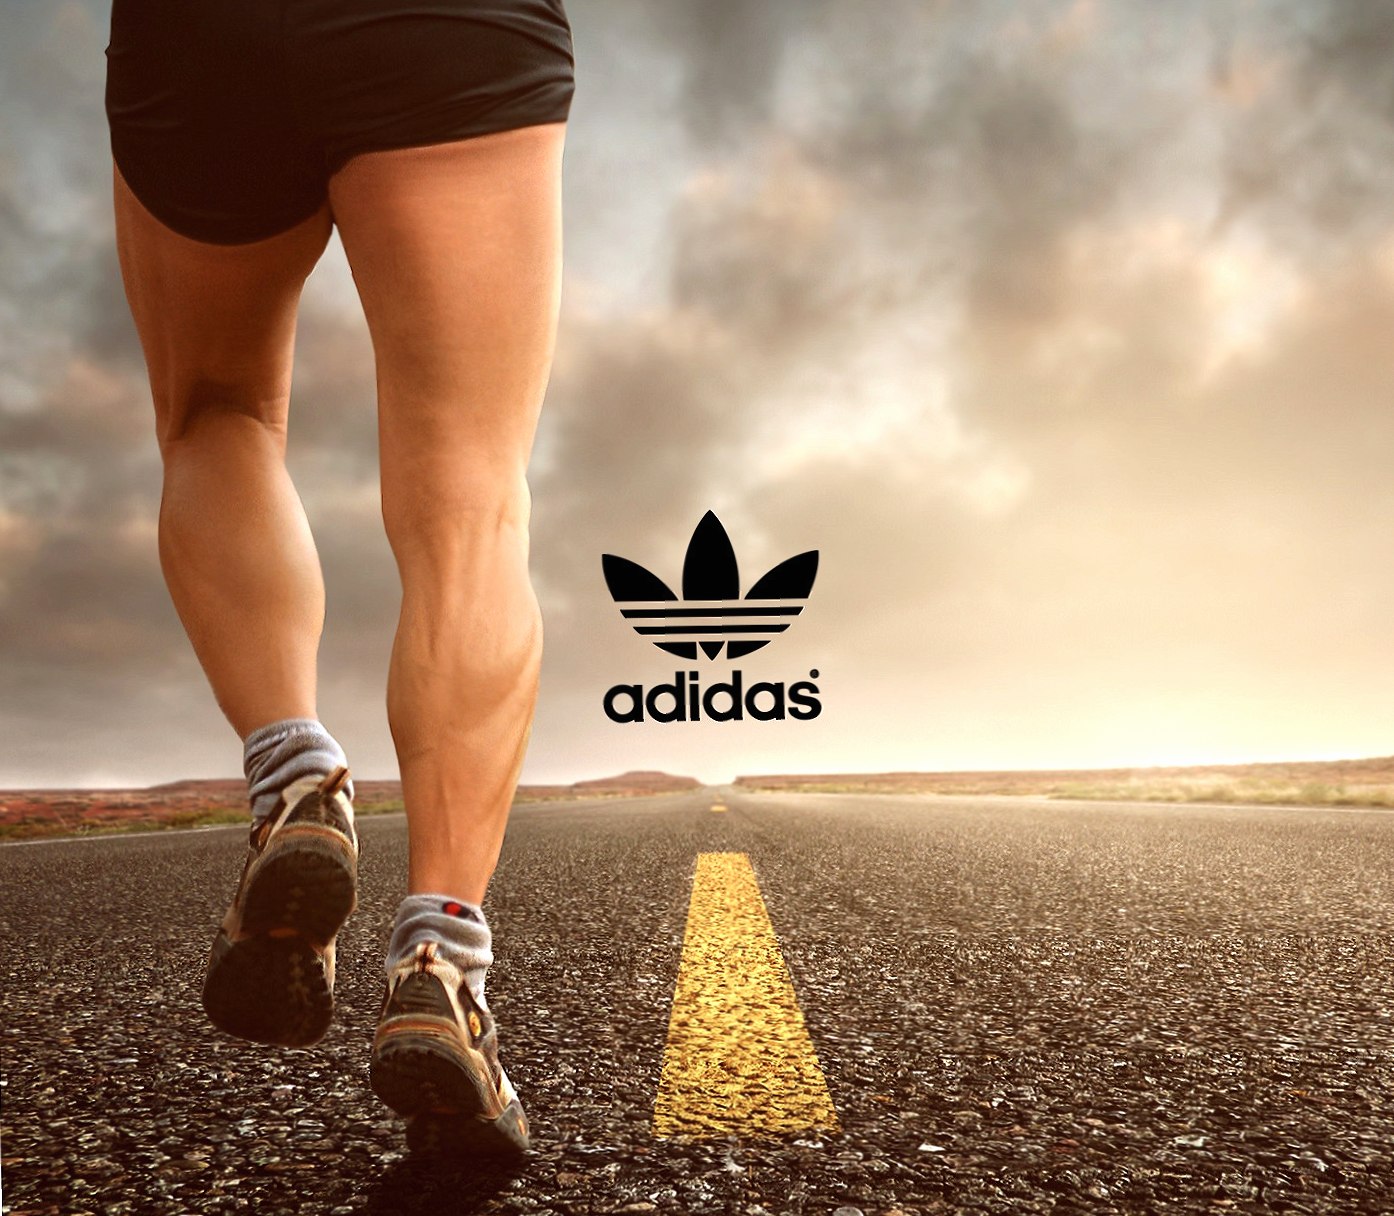 adidas style wallpapers HD quality